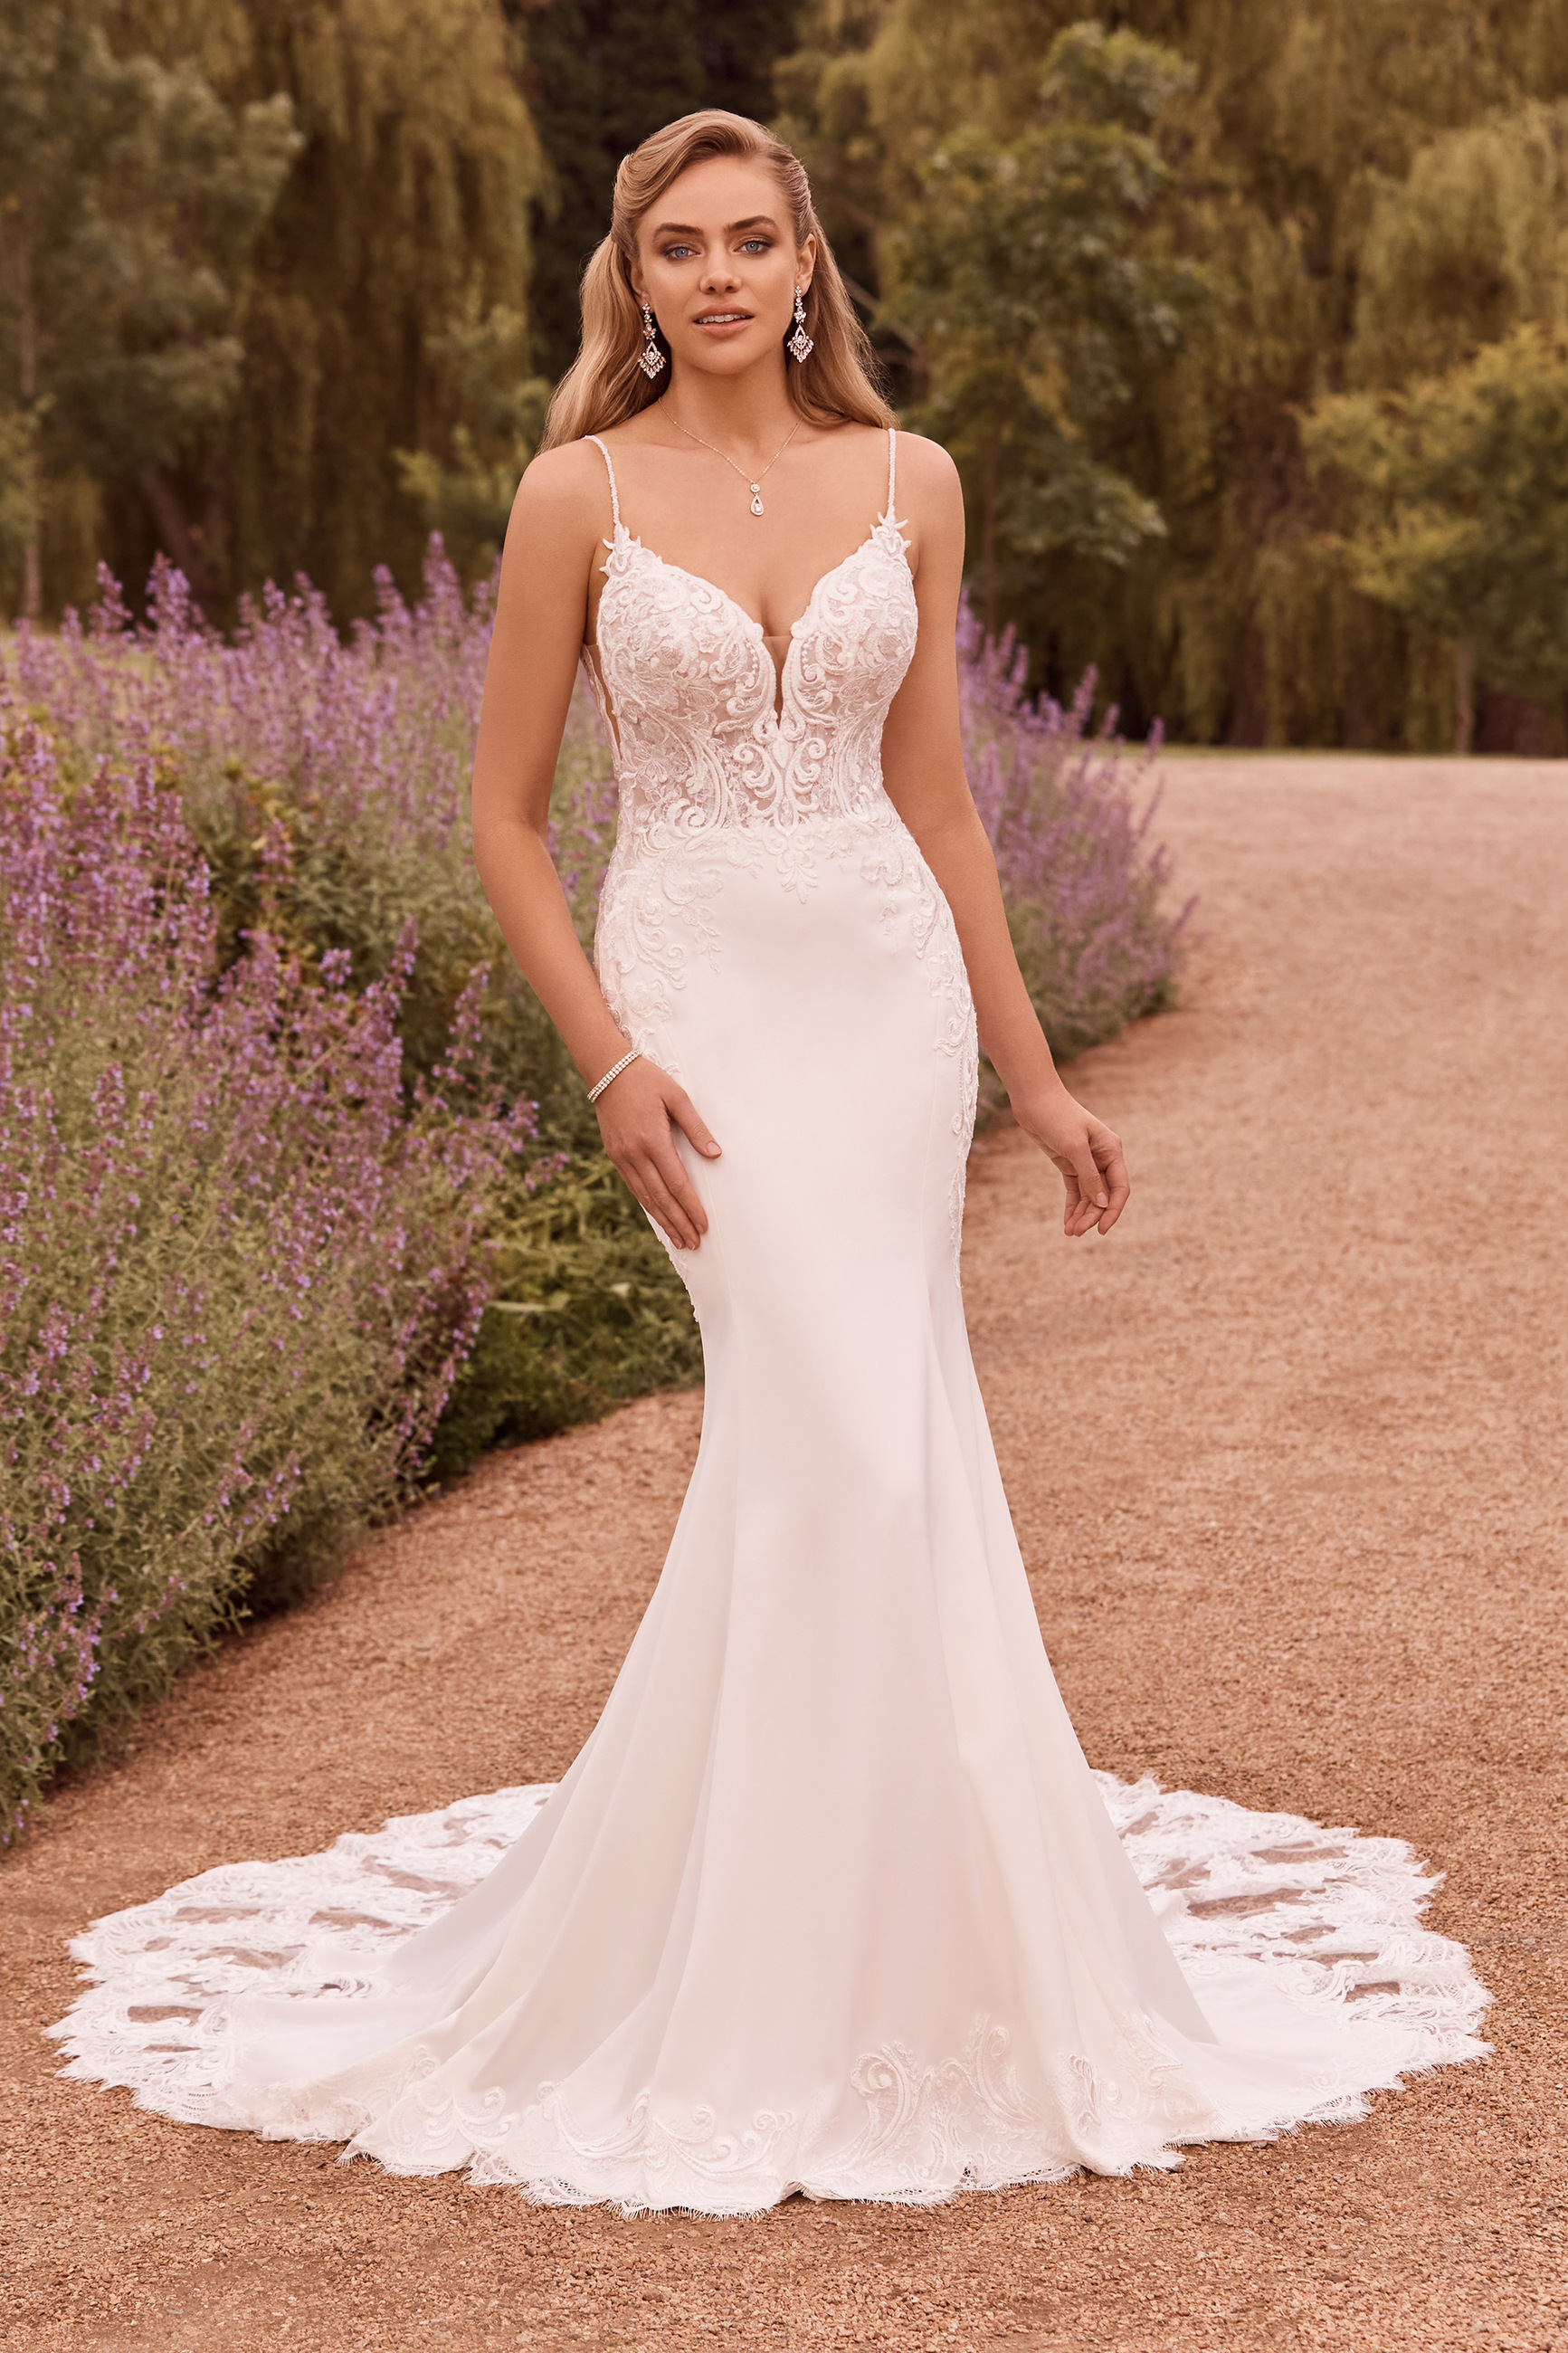 Glamorous Lace A-Line Wedding Dress with Off-the-Shoulder Sweetheart  Neckline - Stella York Wedding Dresses